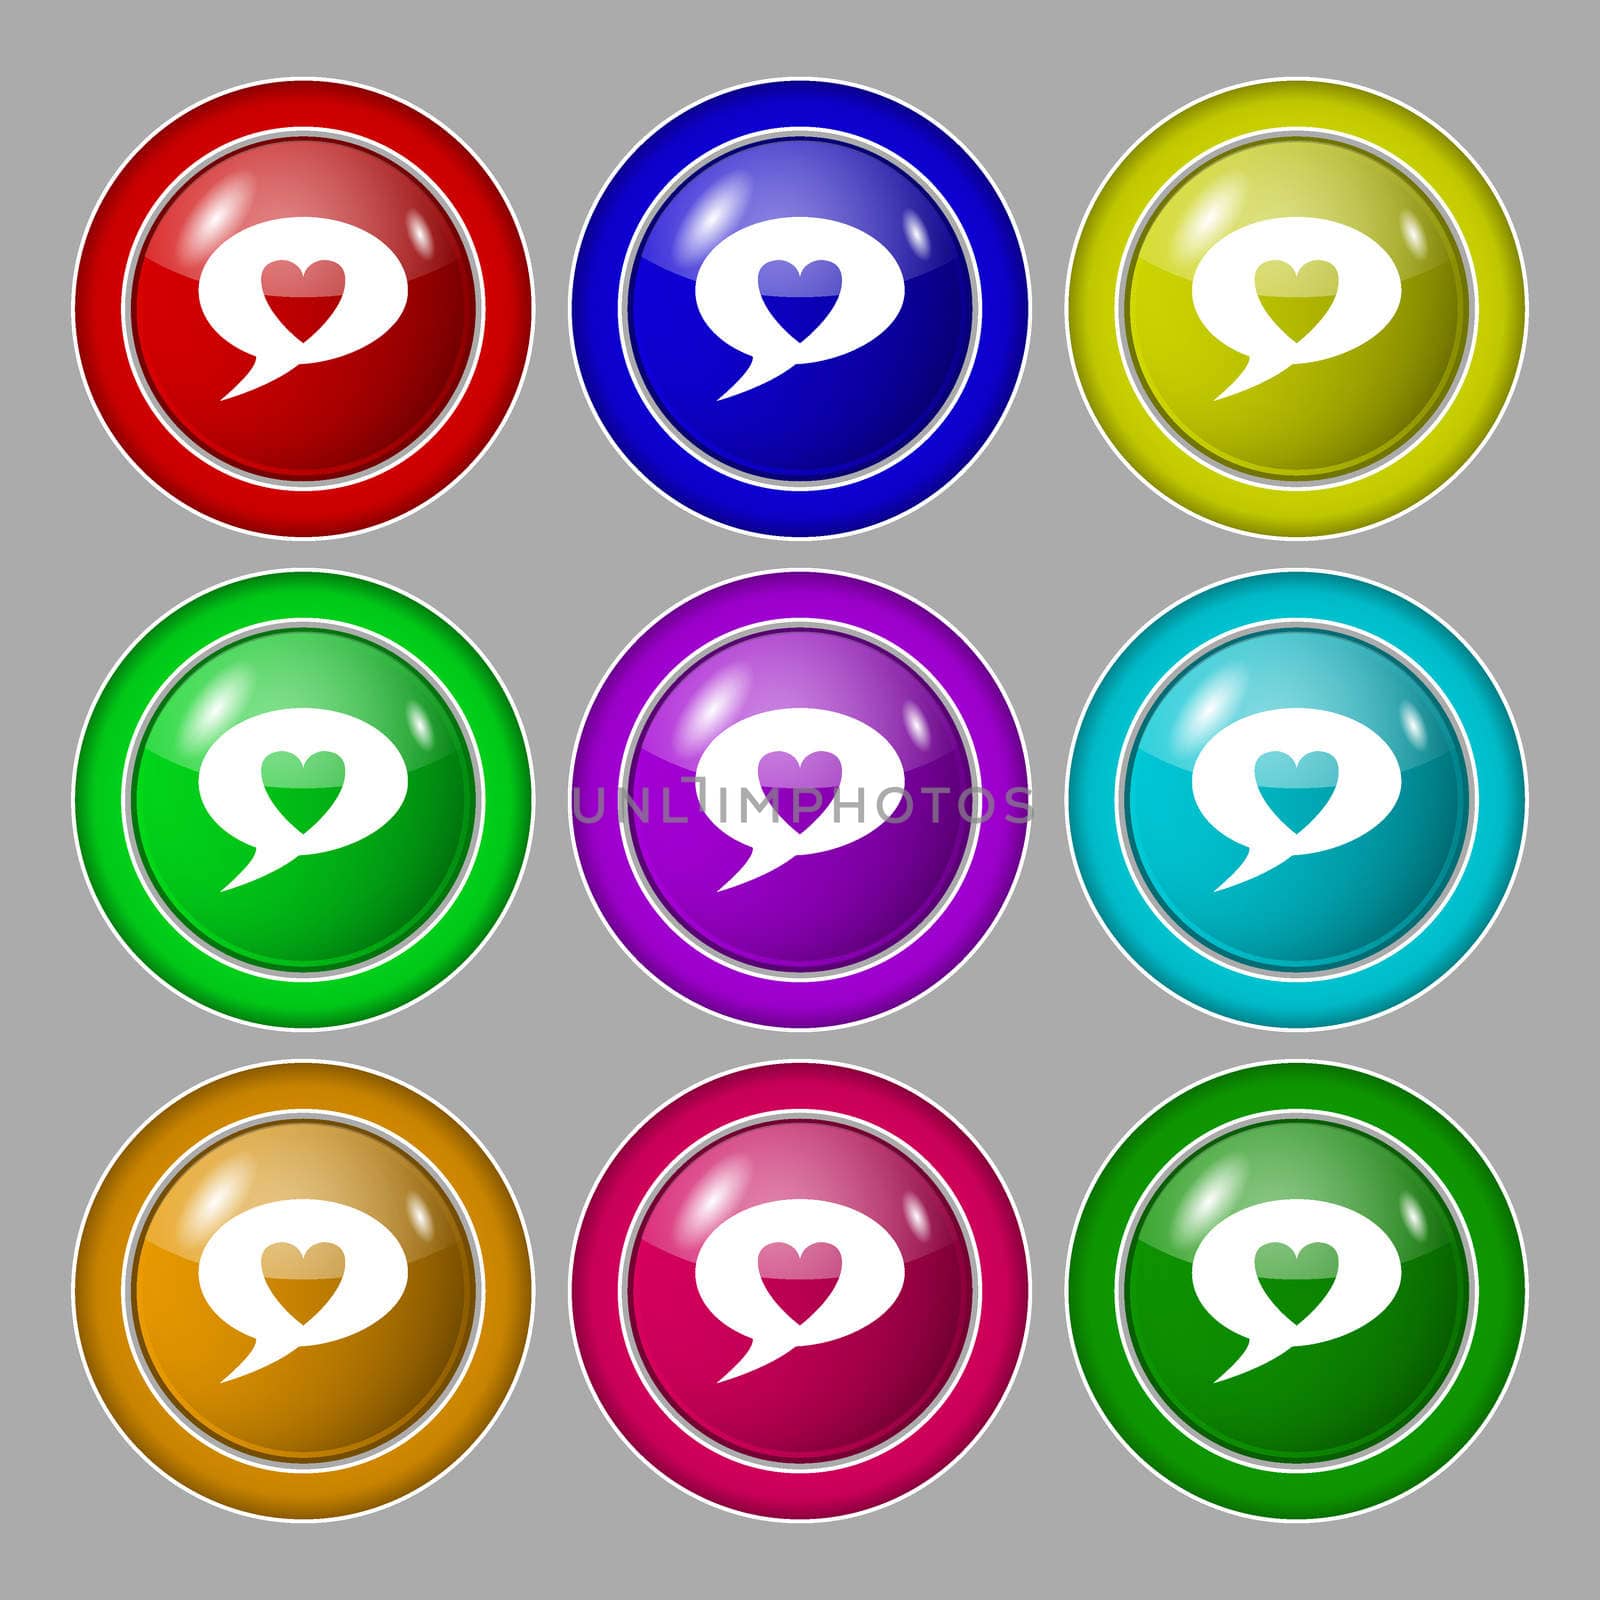 Heart sign icon. Love symbol. Symbol on nine round colourful buttons. illustration